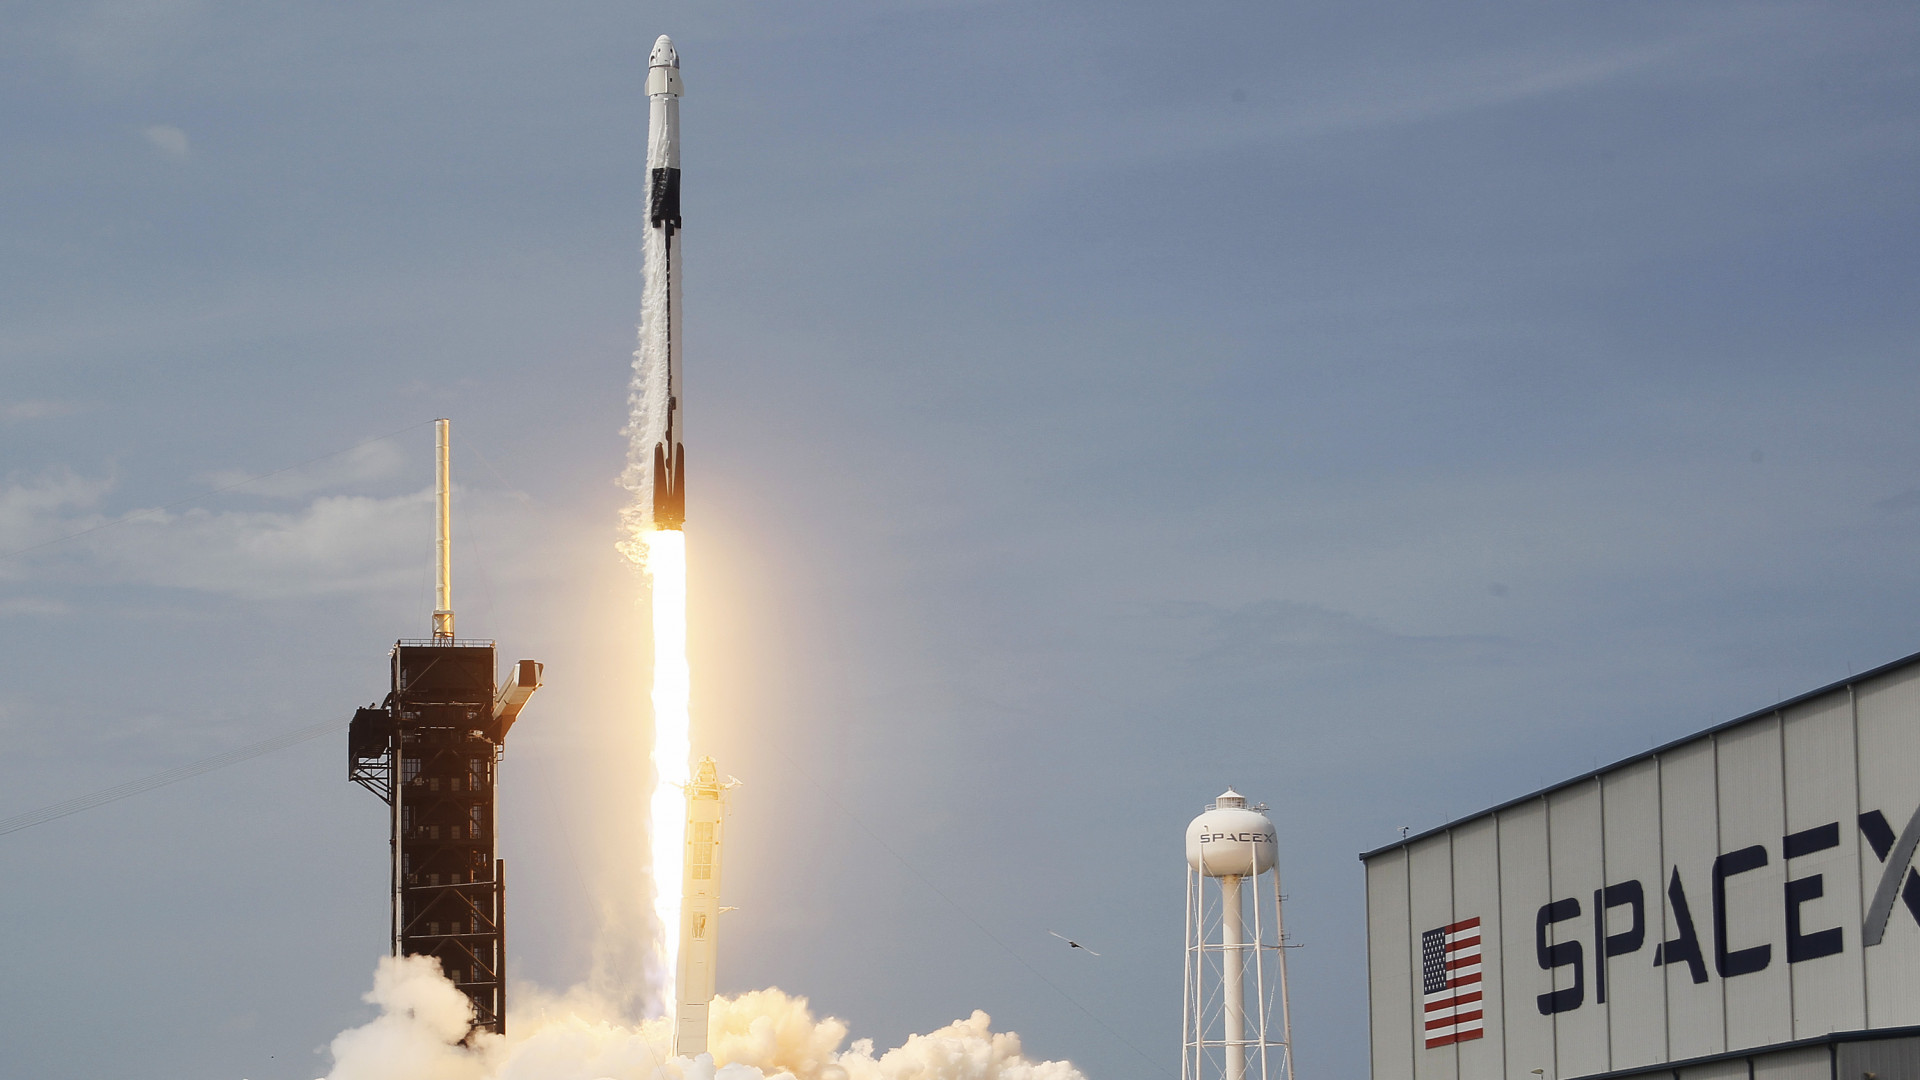 SpaceX has made a historic launch